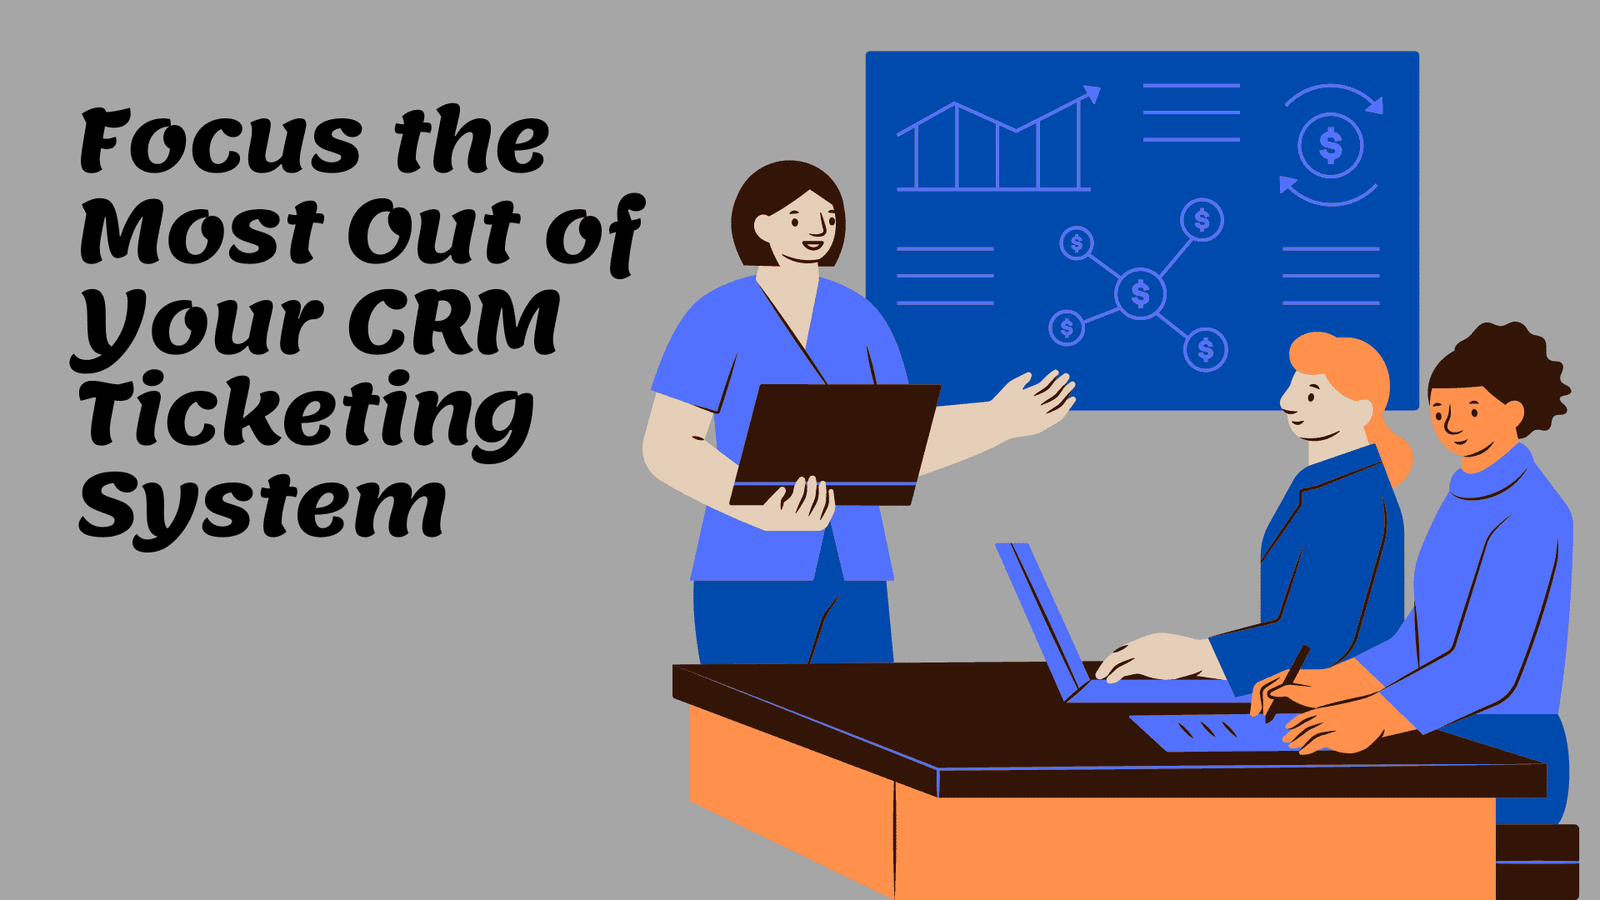 Focus the Most Out of Your CRM Ticketing System Image